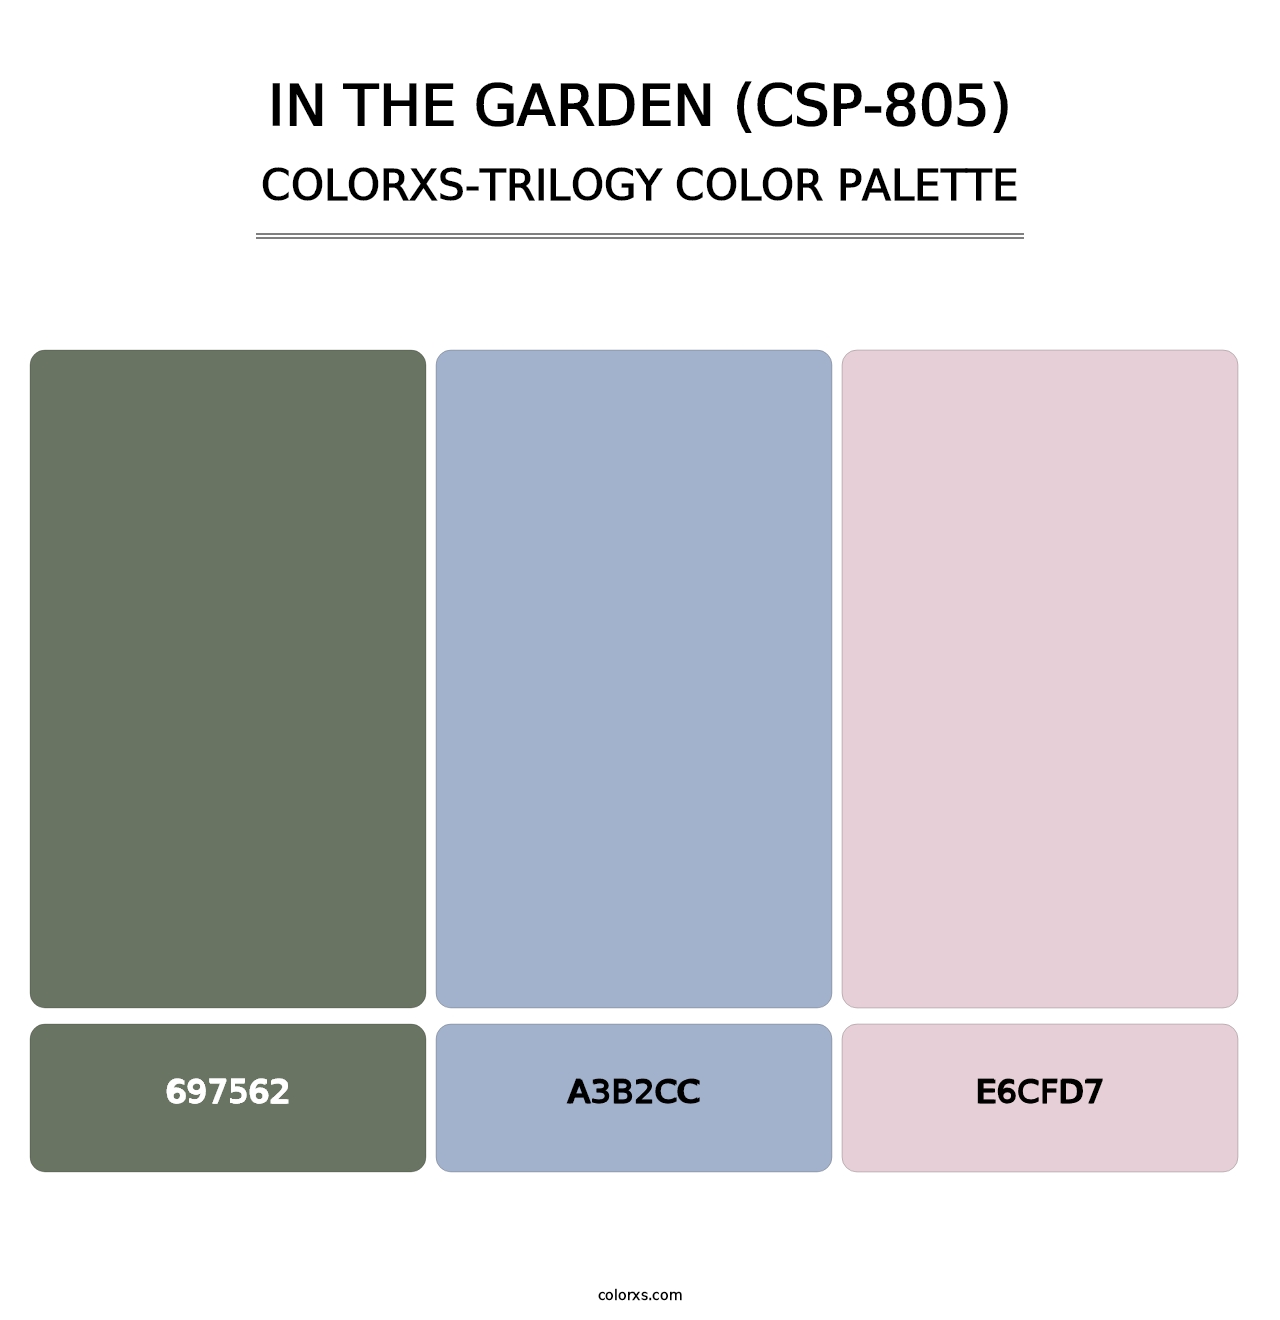 In the Garden (CSP-805) - Colorxs Trilogy Palette